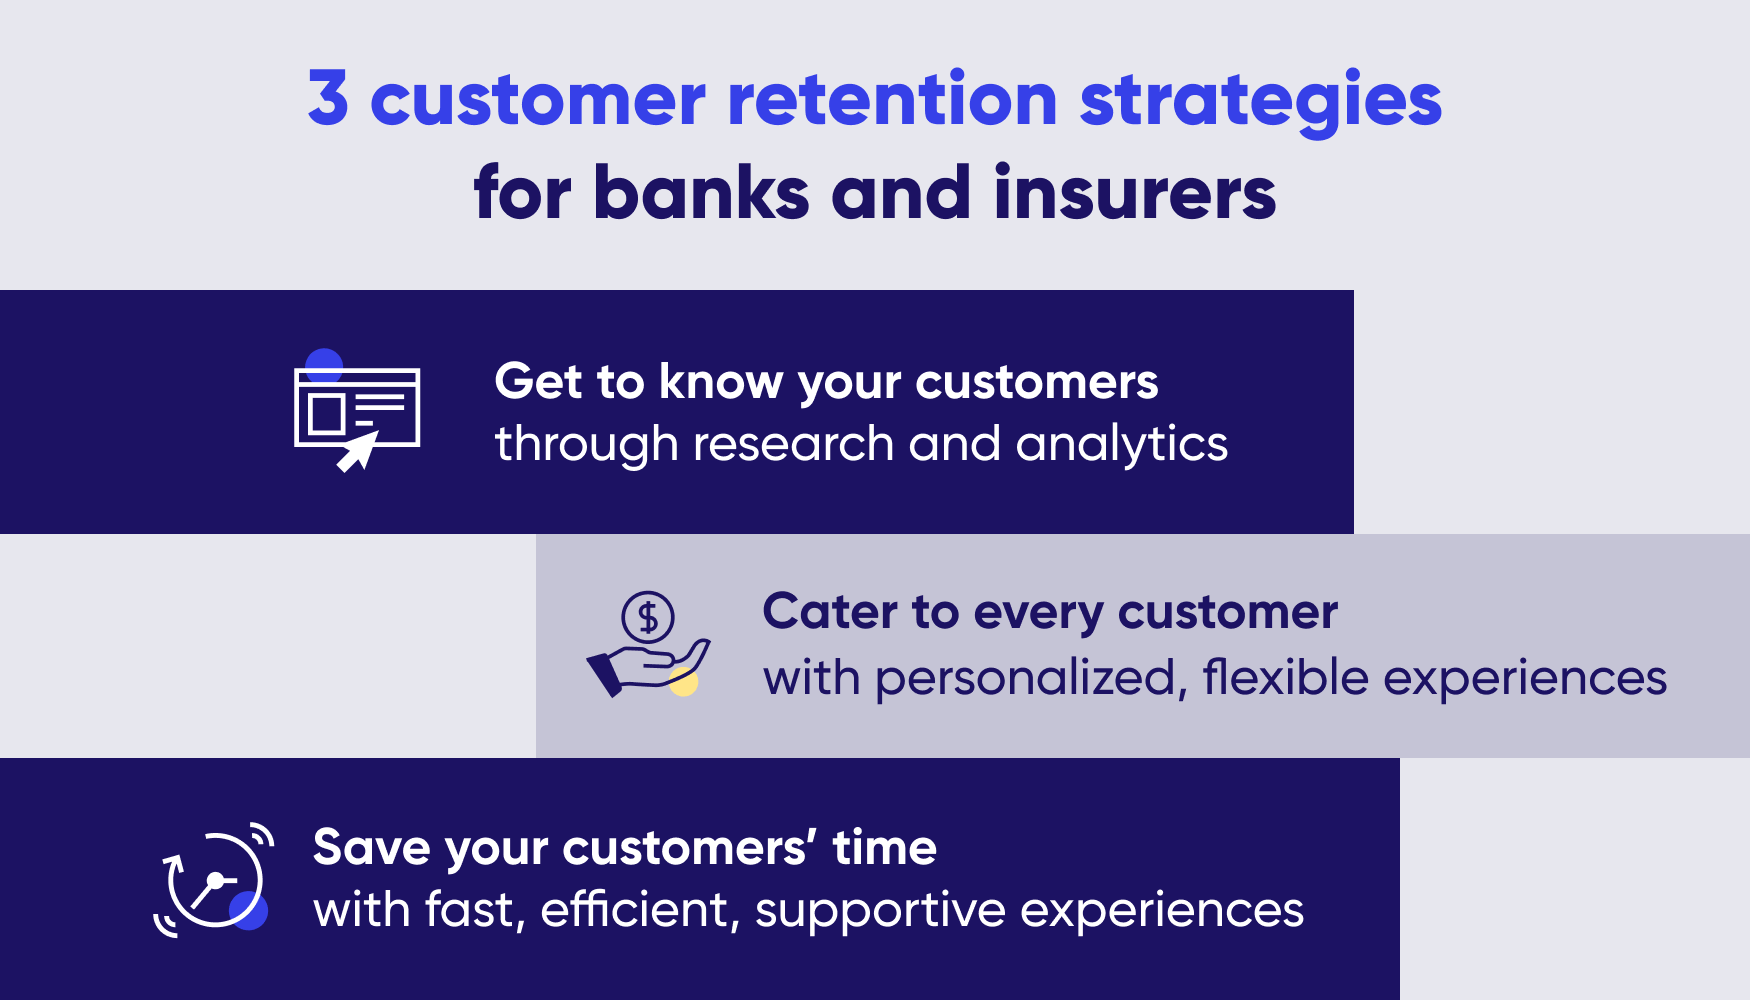 3 customer retention strategies for banks and insurers